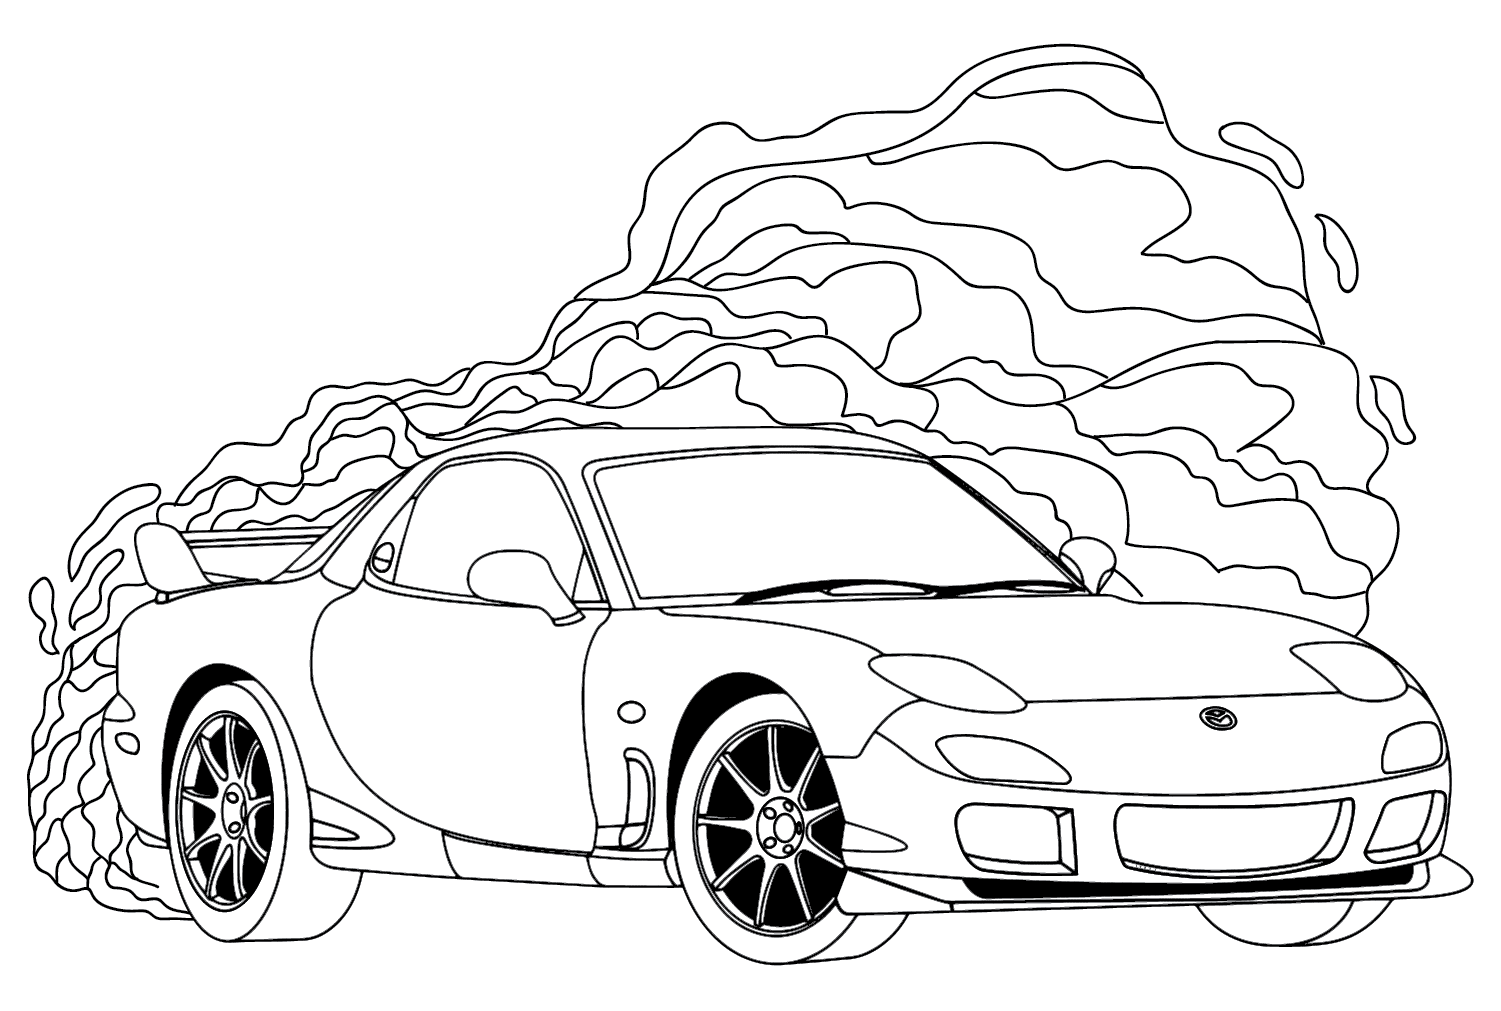 Mazda RX7 Coloring Page from Mazda